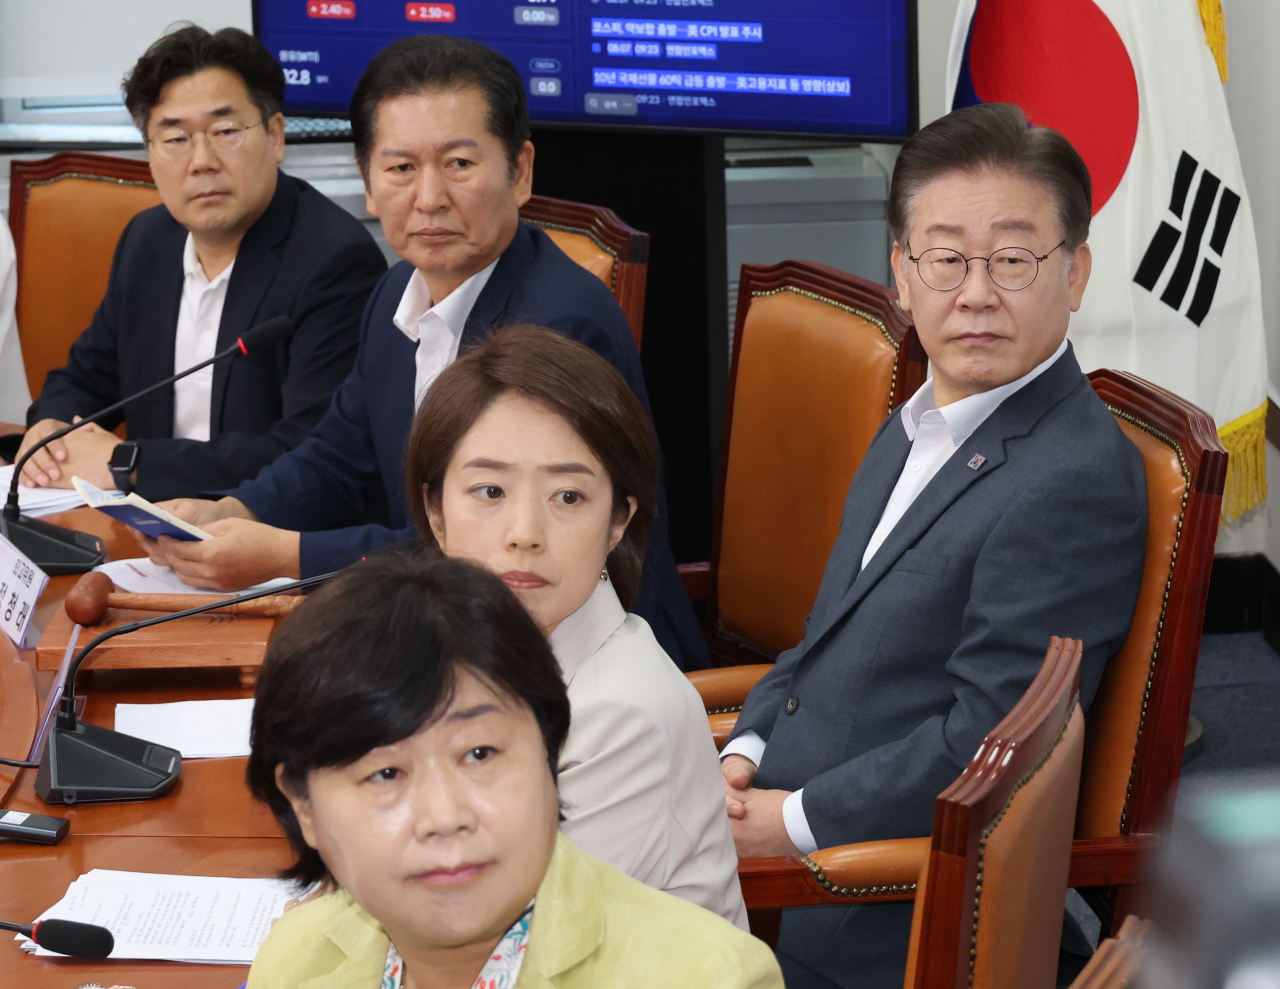 Lee Jae-myung, leader of the Democratic Party of Korea, watches news related to the Saemangeum Jamboree during a top-level meeting at the office of the National Assembly on Monday. (Yonhap)